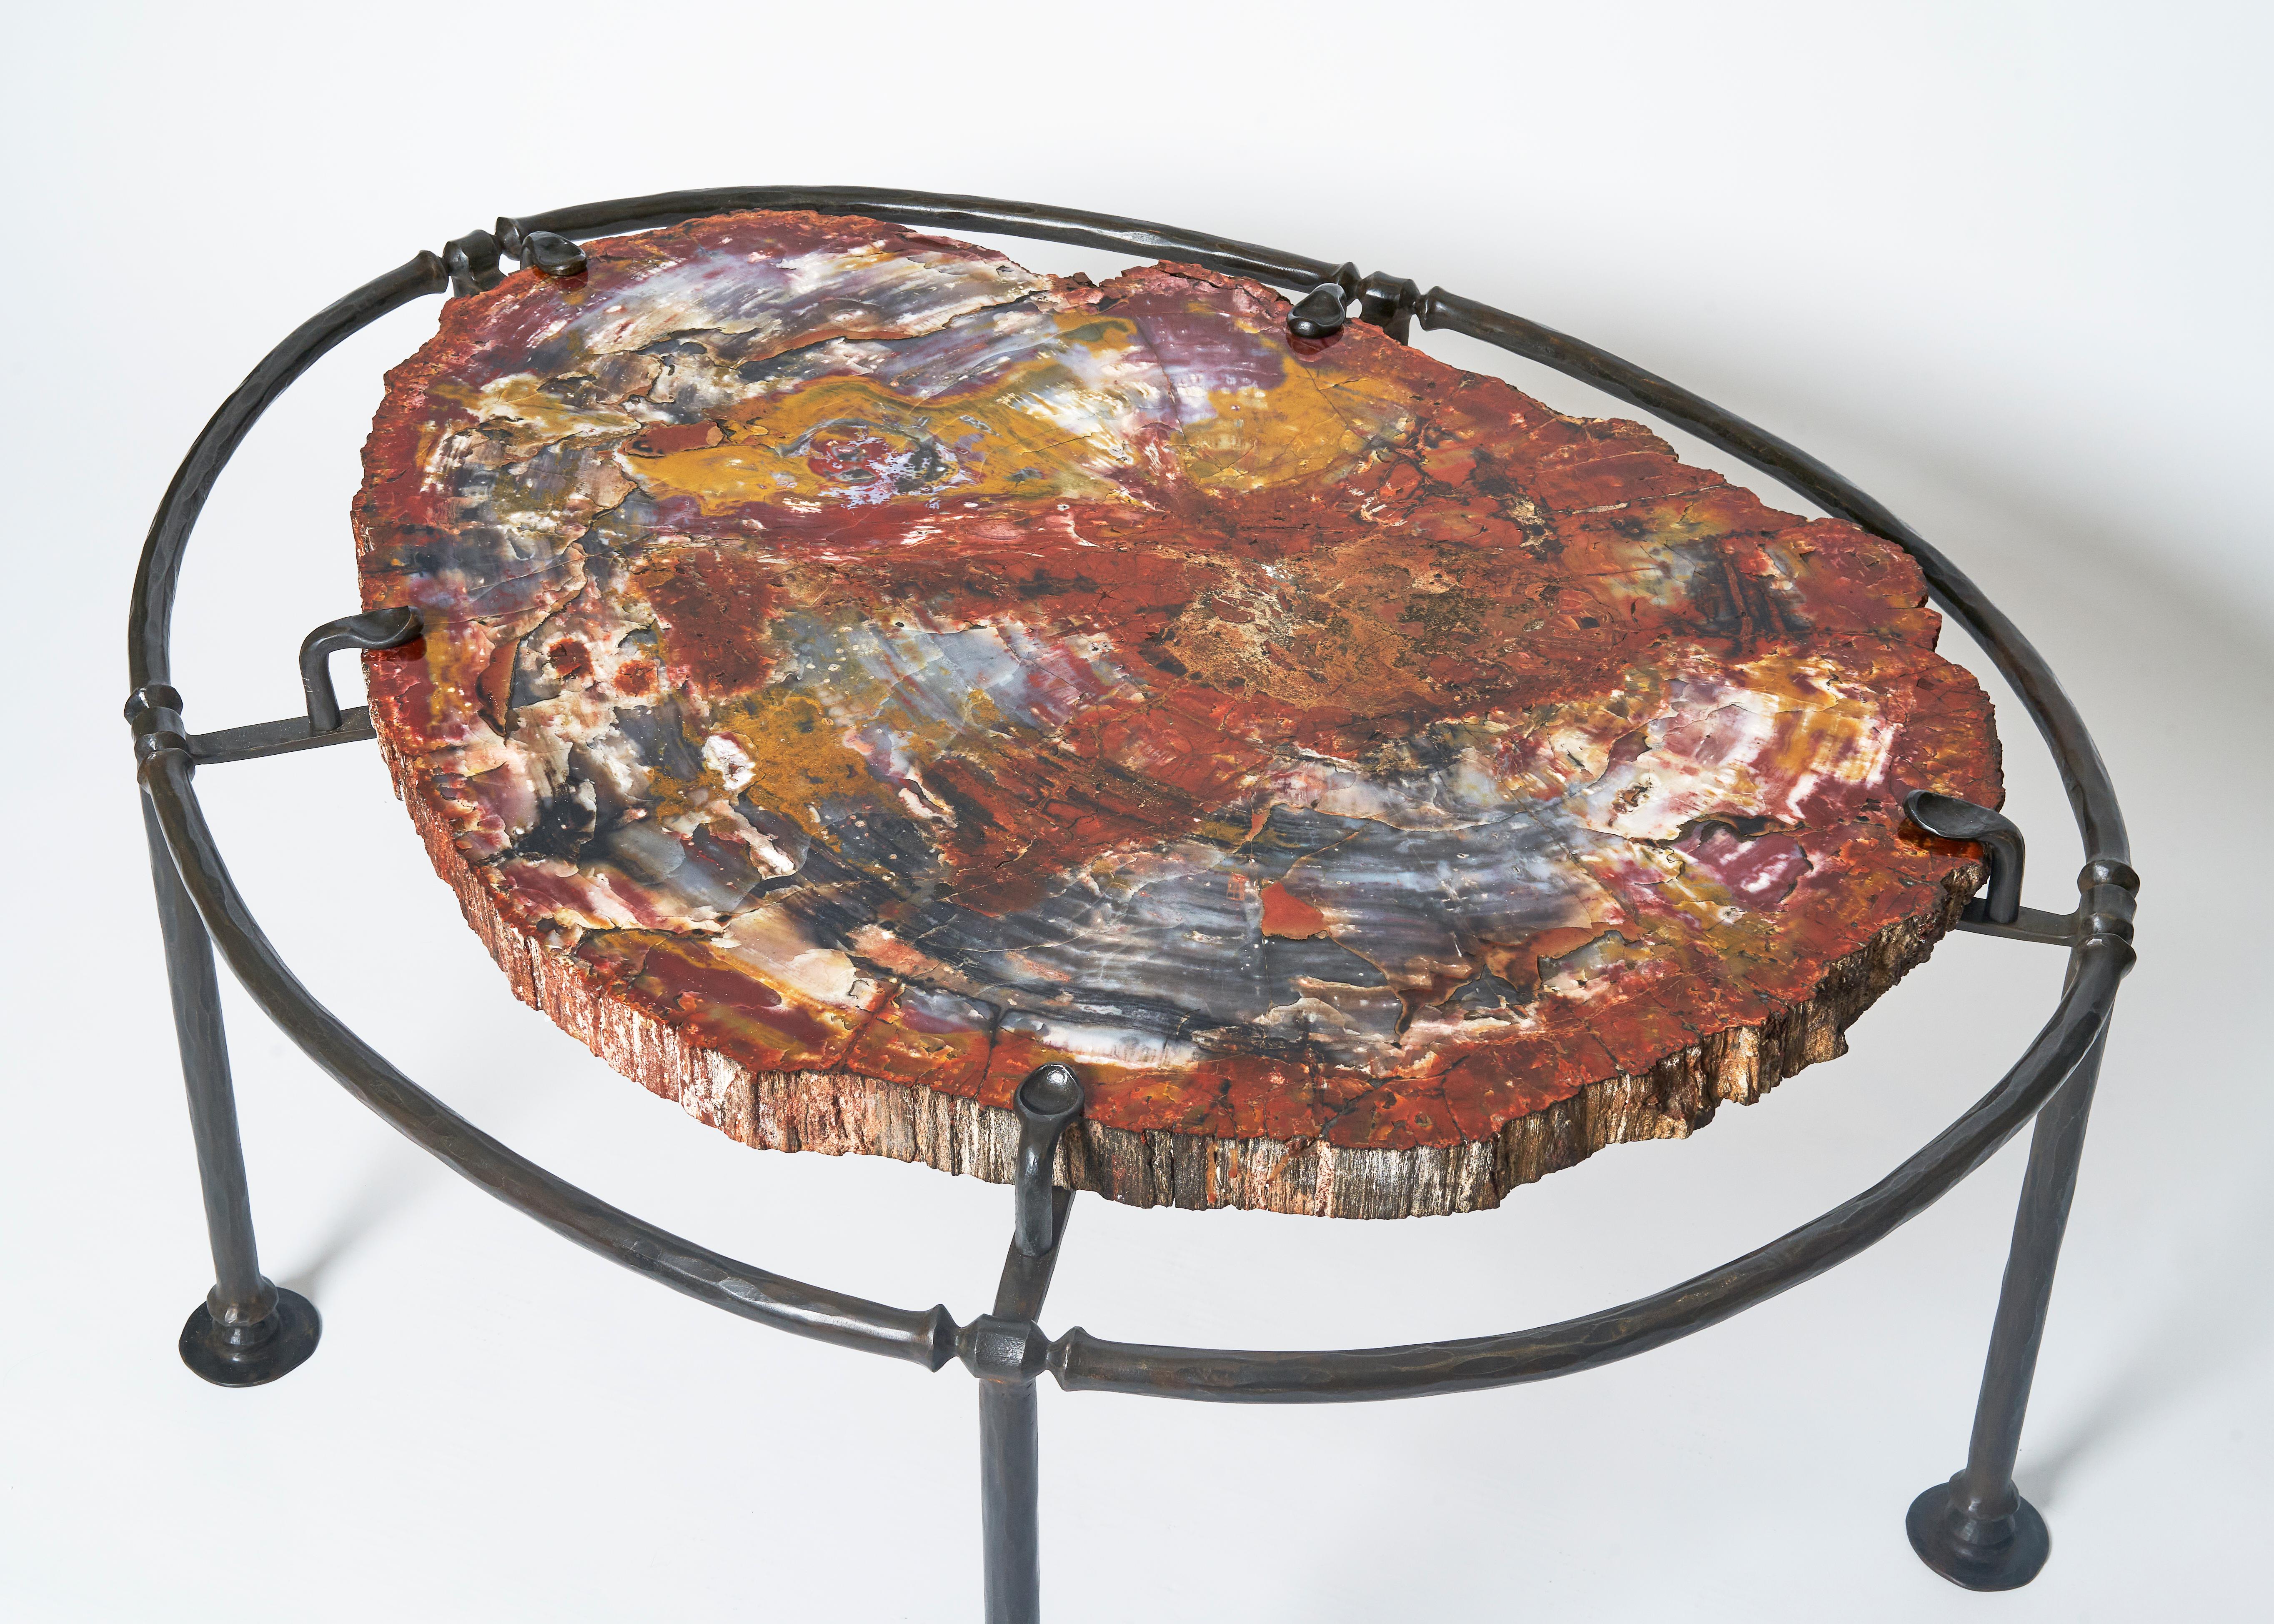 Wrought iron base and petrified wood top
Signed, Original Edition by JML.